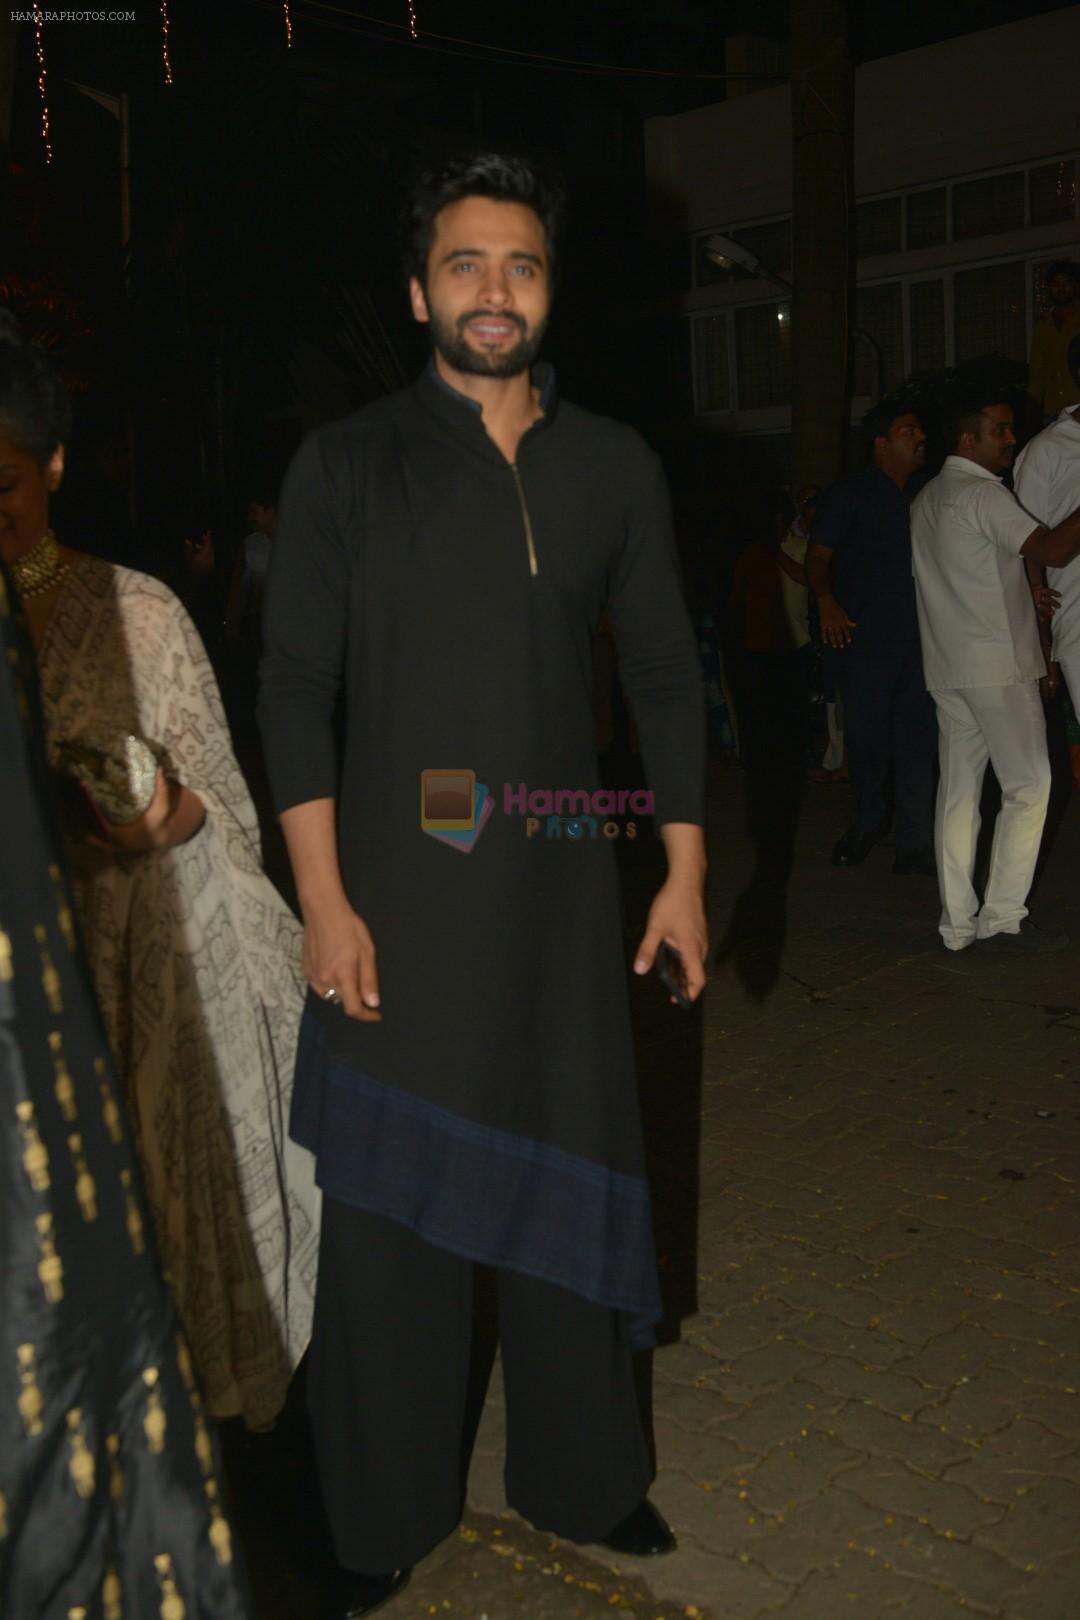 JackkyBhagnani at Anil Kapoor's Diwali party in juhu home on 20th Oct 2017